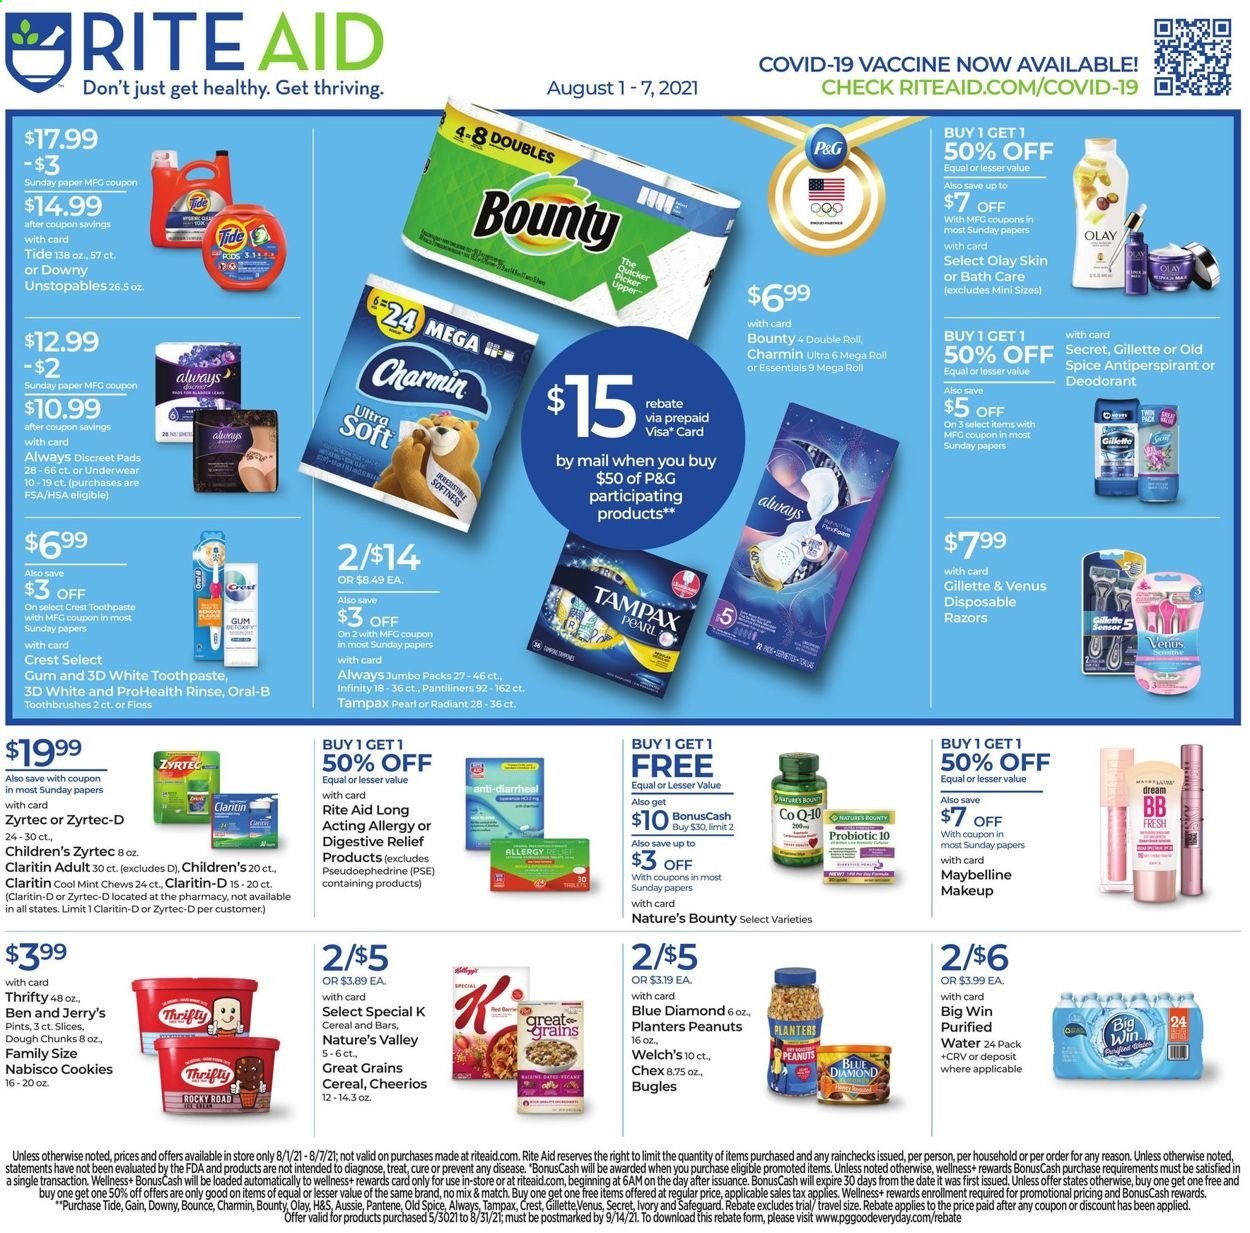 thumbnail - RITE AID Flyer - 08/01/2021 - 08/07/2021 - Sales products - Welch's, cookies, chewing gum, Digestive, cereals, Cheerios, spice, peanuts, Planters, Blue Diamond, purified water, Charmin, Gain, Tide, Unstopables, Bounce, Old Spice, Oral-B, toothpaste, Crest, Tampax, pantiliners, sanitary pads, Always Discreet, Olay, Infinity, Aussie, Head & Shoulders, Pantene, Brite, anti-perspirant, deodorant, Gillette, Venus, makeup, Maybelline, Nature's Bounty, Zyrtec. Page 1.